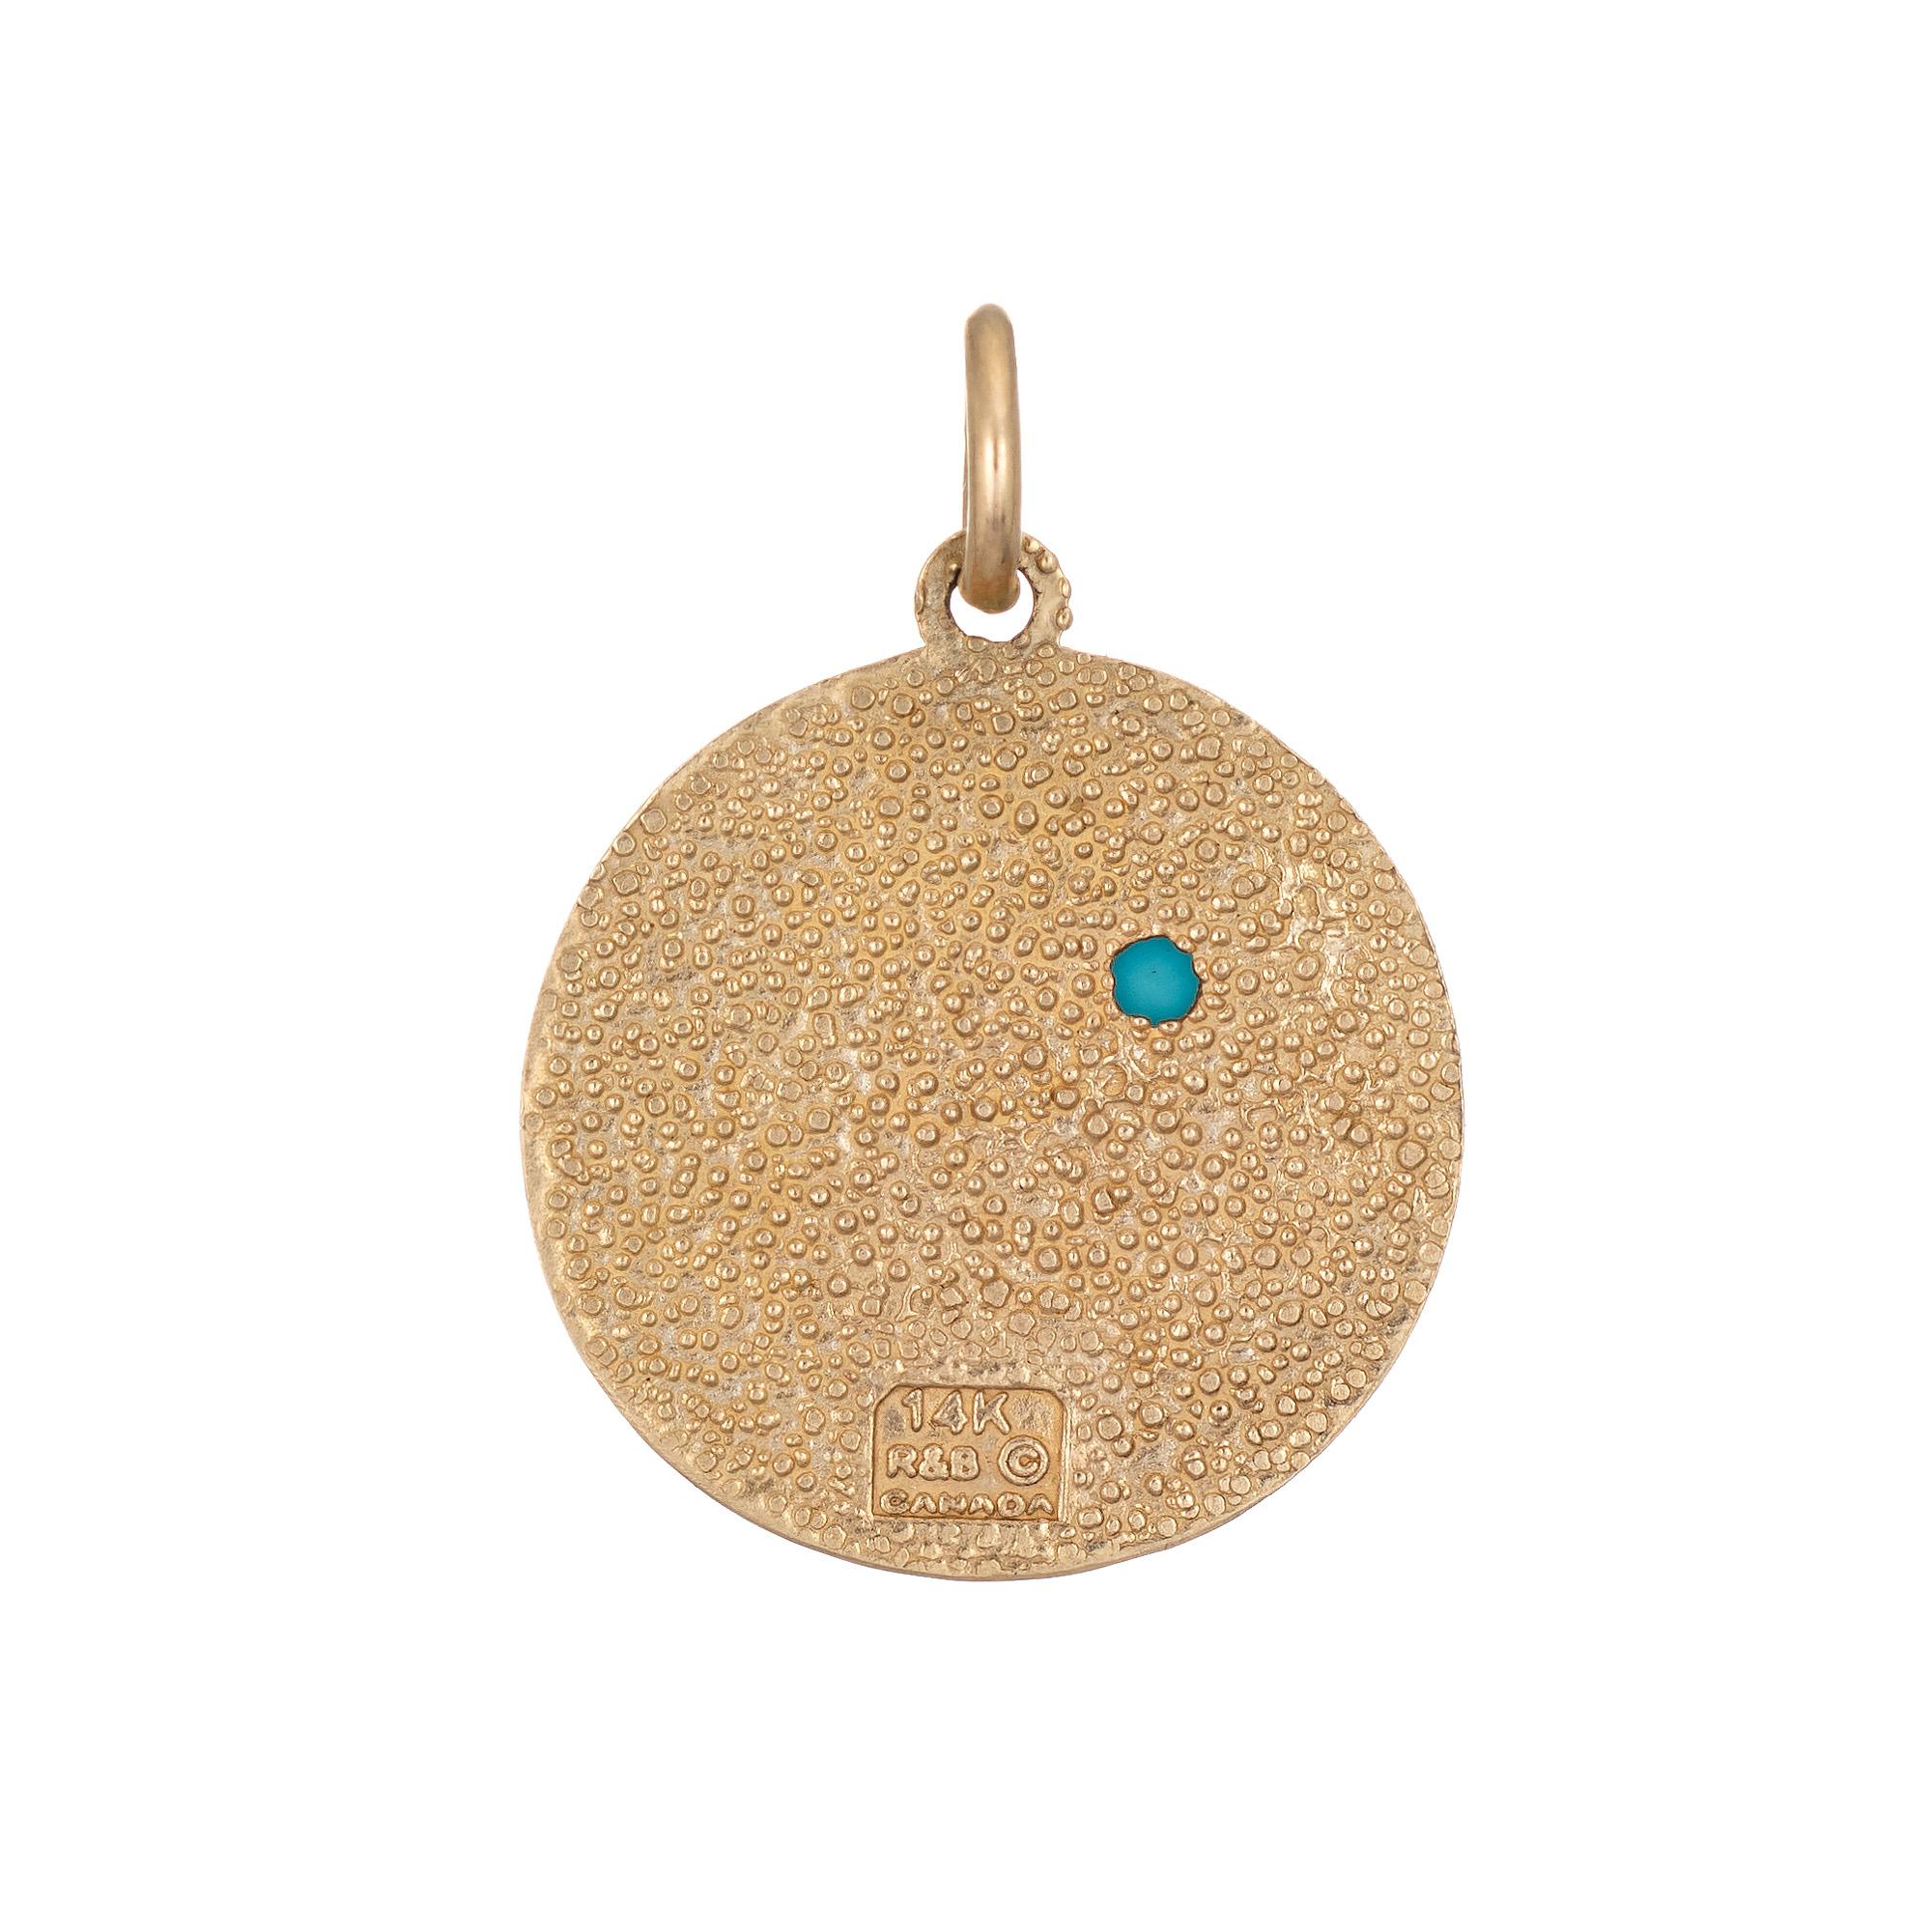 Finely detailed vintage Aquarius charm crafted in 14k yellow gold.  

The unique charm highlights the water sign, Aquarius. A small piece of cabochon cut turquoise measures 2mm. The bale measures 3mm and can accommodate a thin to medium thickness